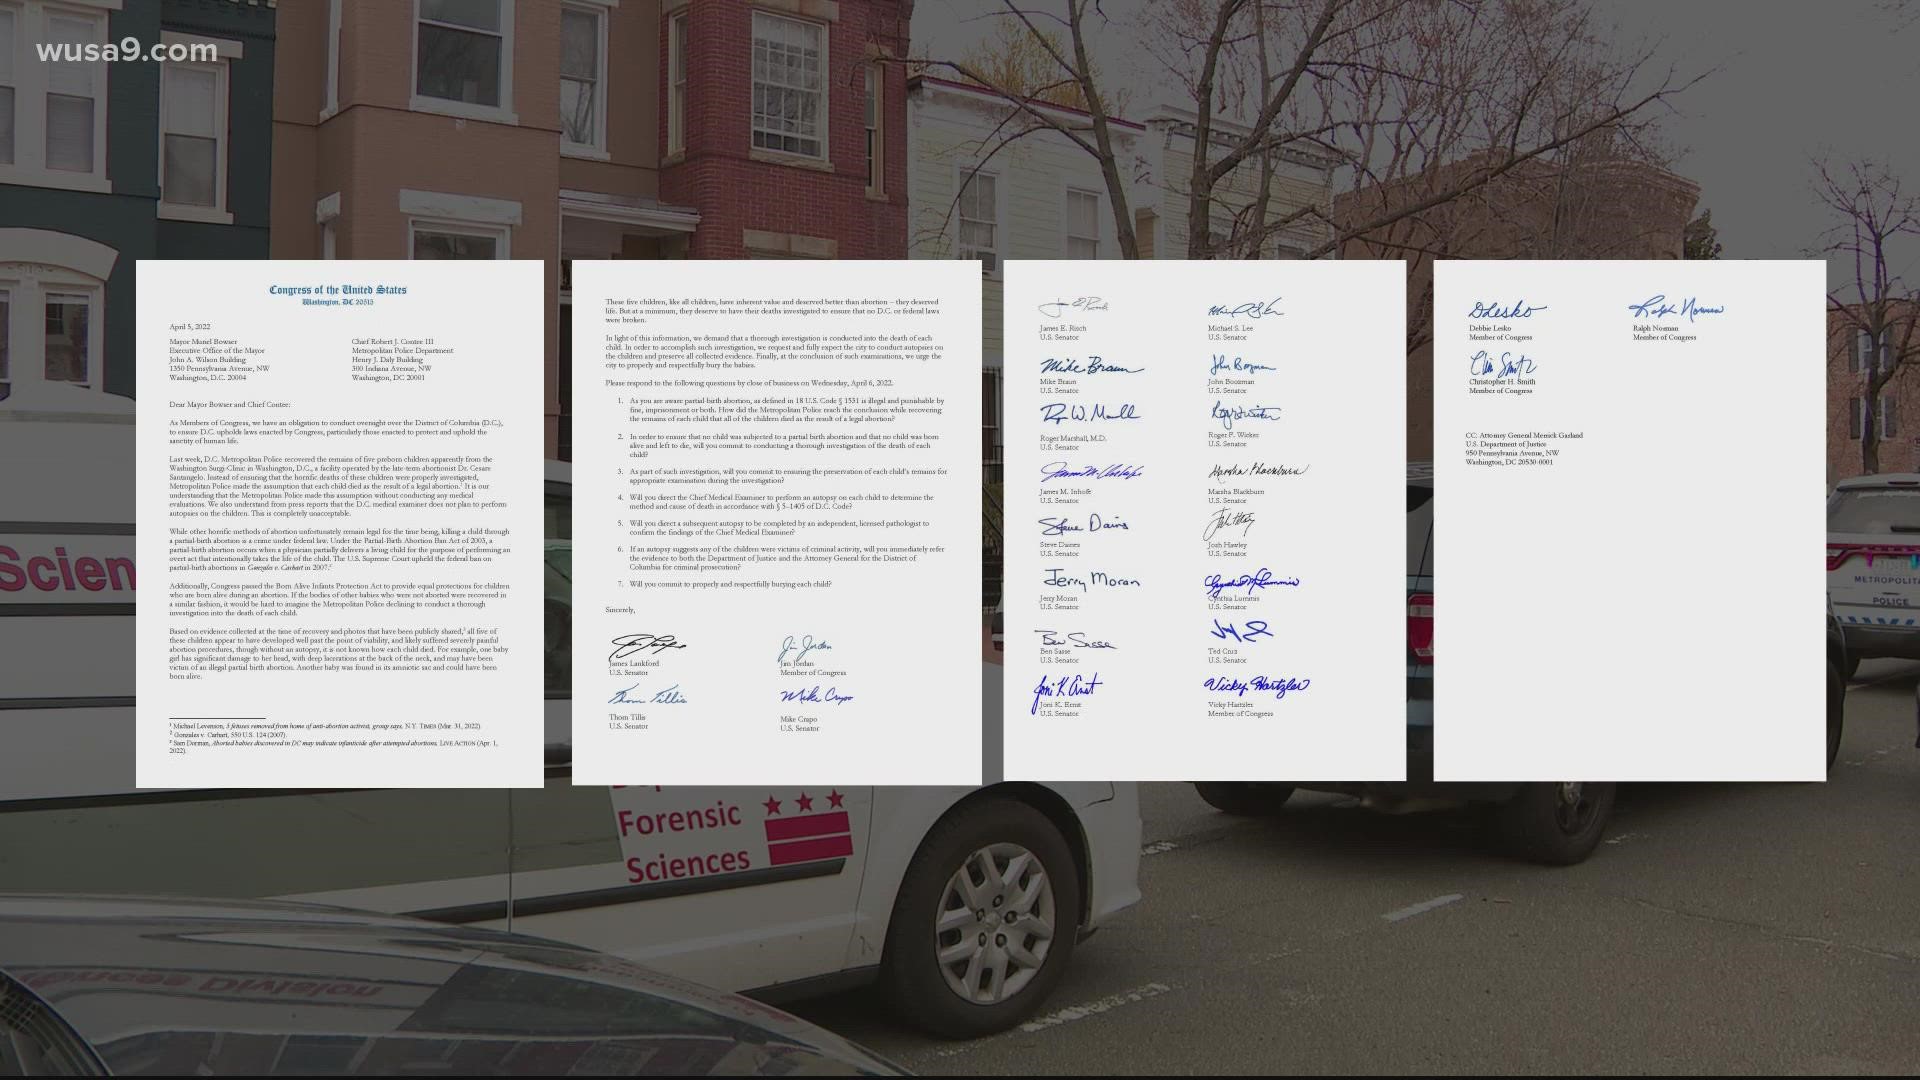 A joint letter from 18 Republican senators and 5 representatives calls for action and a "thorough investigation" by Mayor Muriel Bowser and Chief Robert Contee.